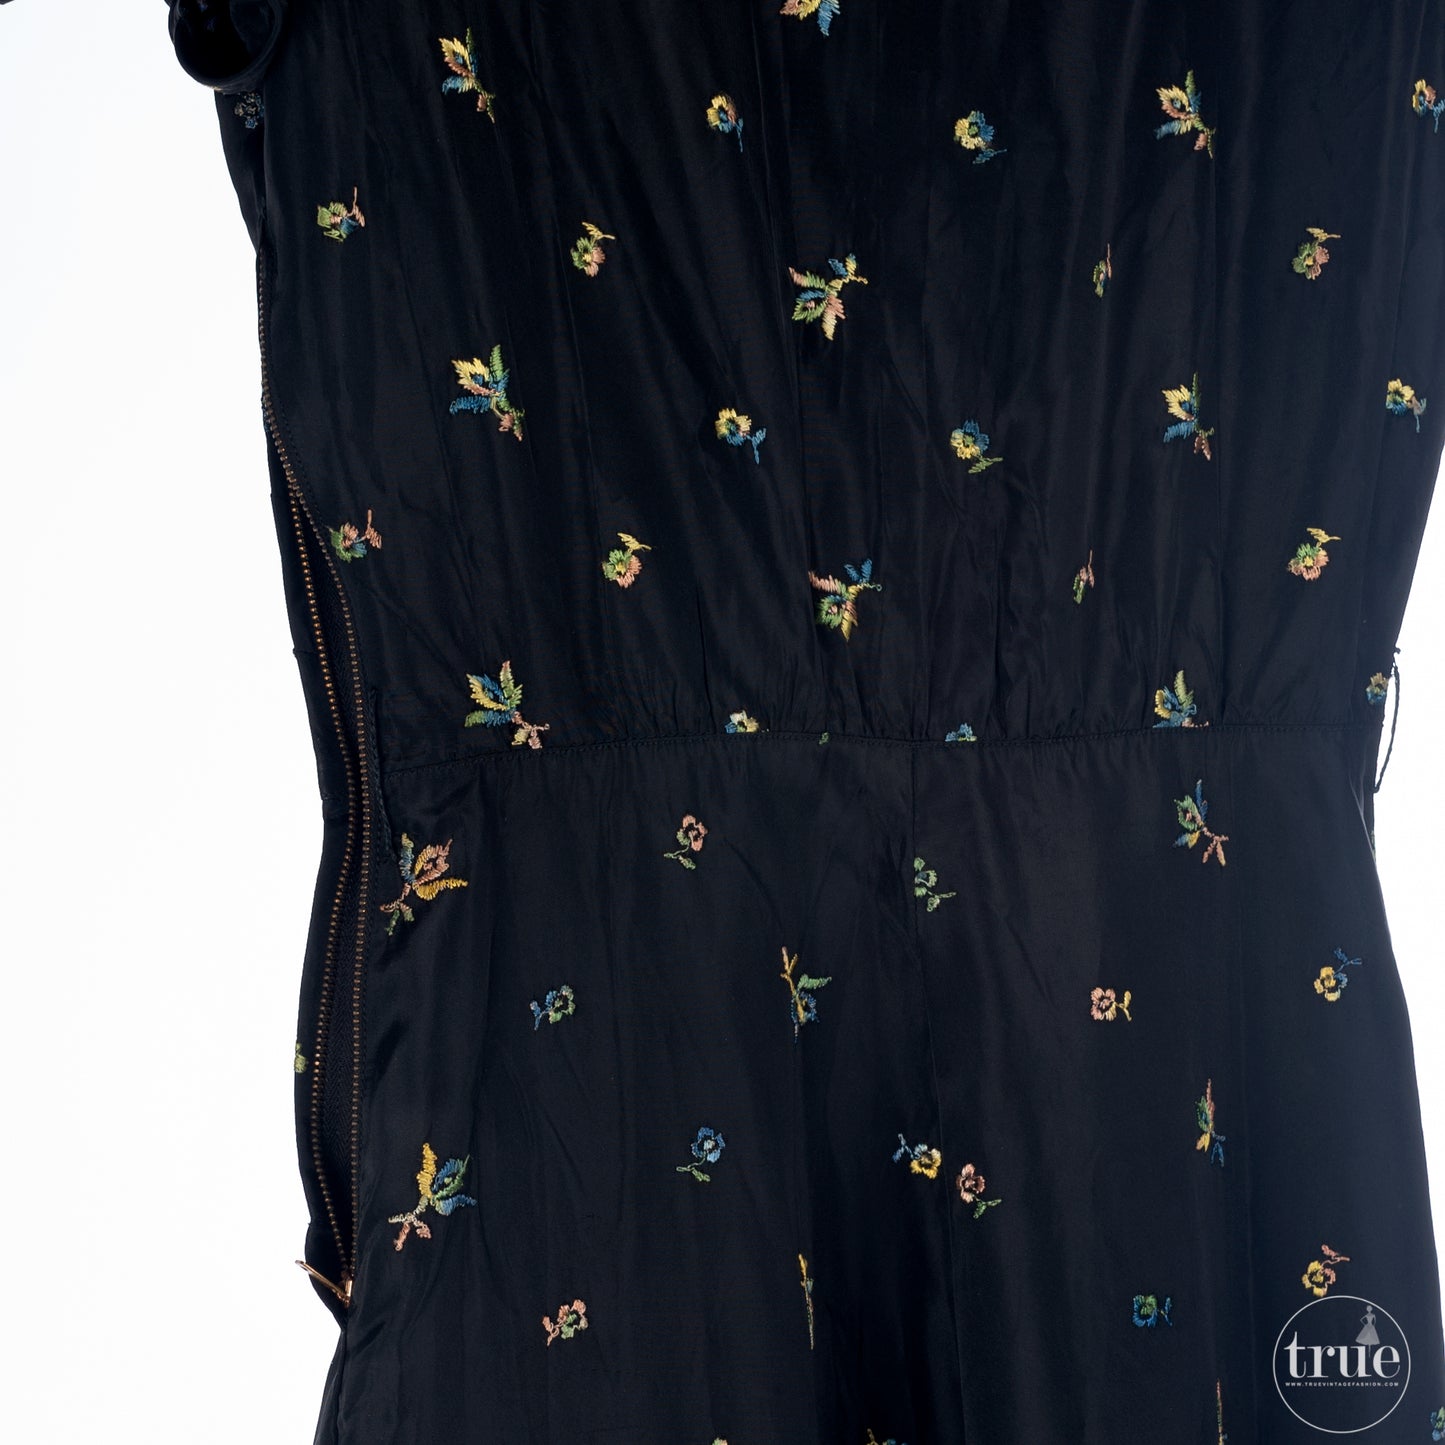 vintage 1930's dress ...black floral embroidered maxi dress with princess sleeves